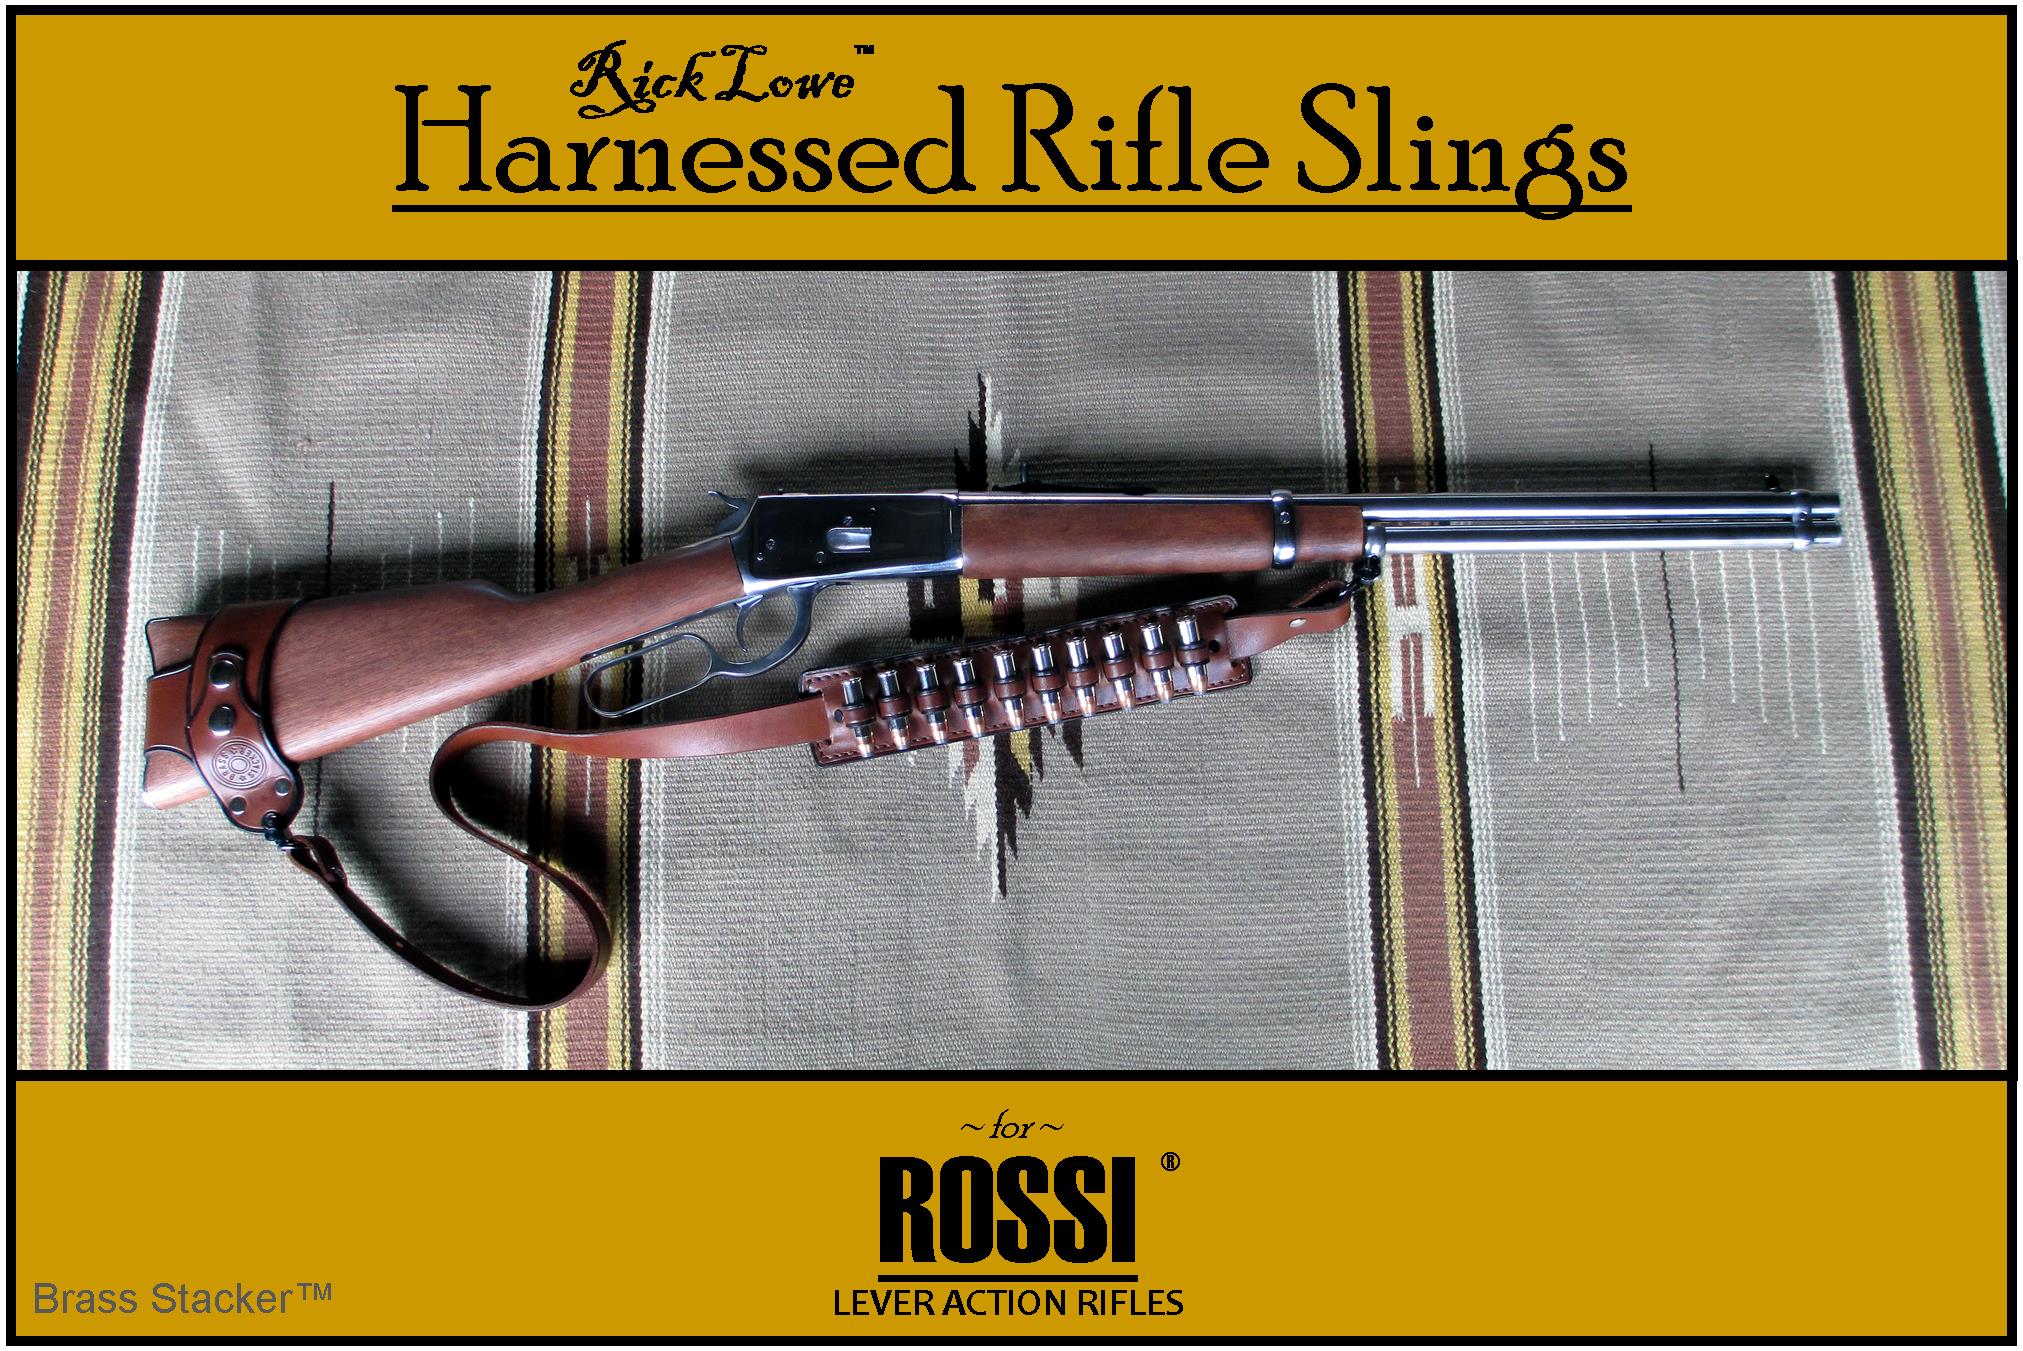 Brass Stacker™ RLO No-Drill Harnessed Rifle Sling for ROSSI®